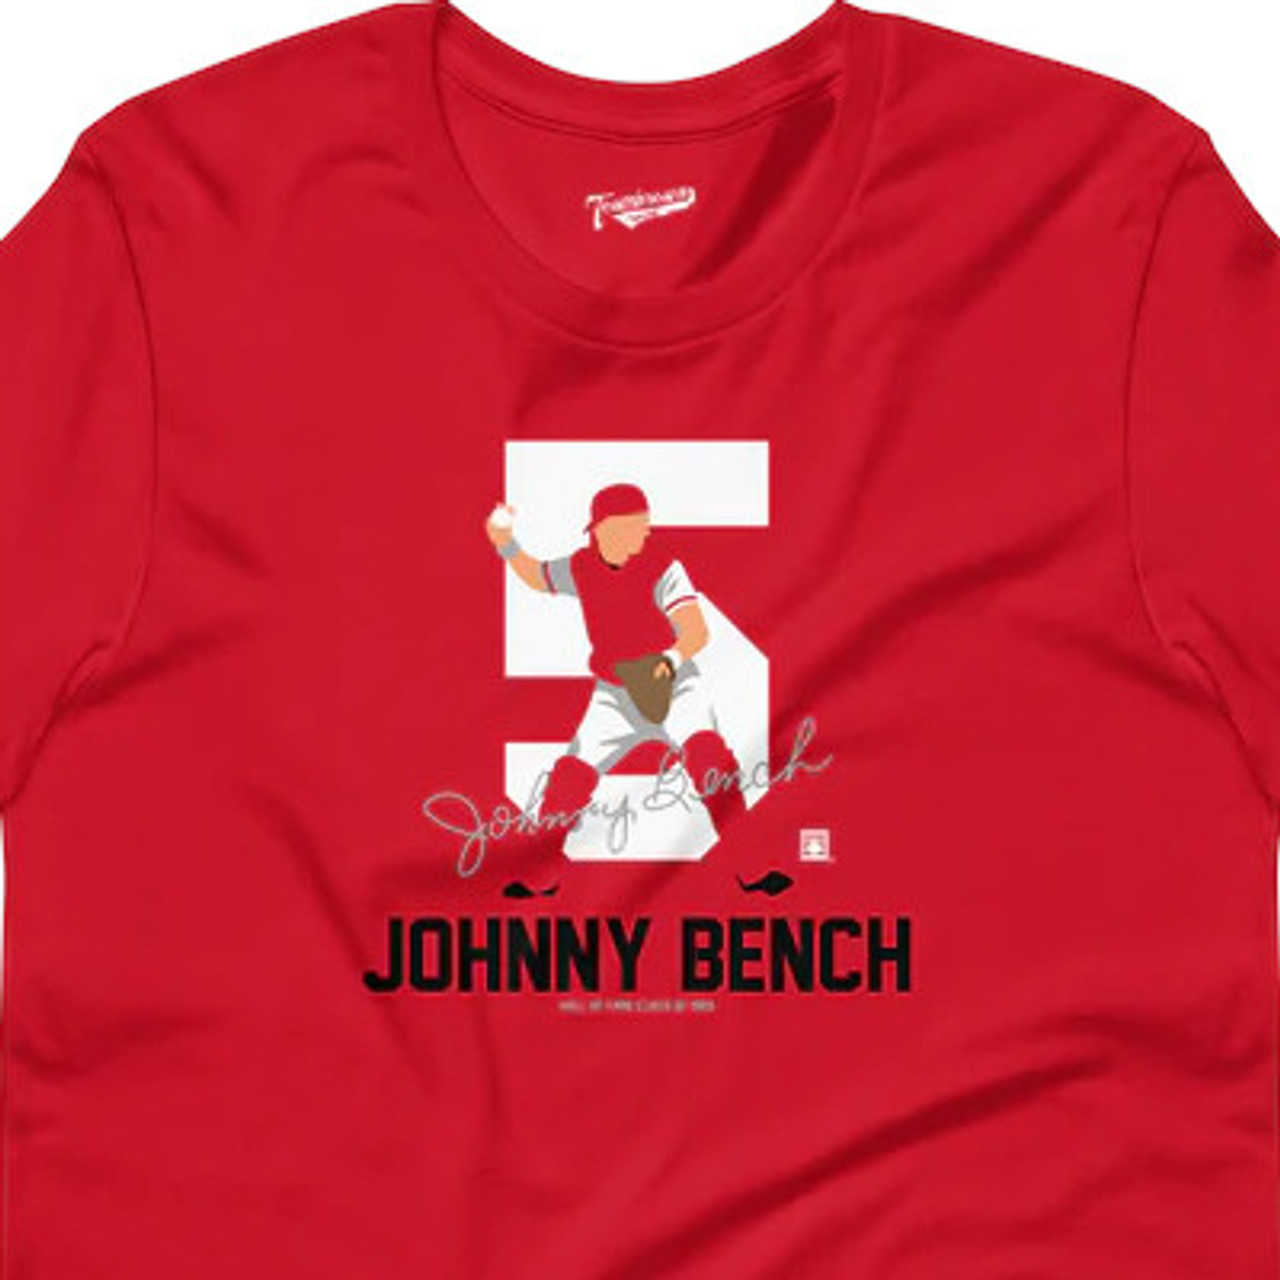 T- of Signature Men\'s Bench Shirt Member Teambrown Hall Johnny Fame Red Baseball